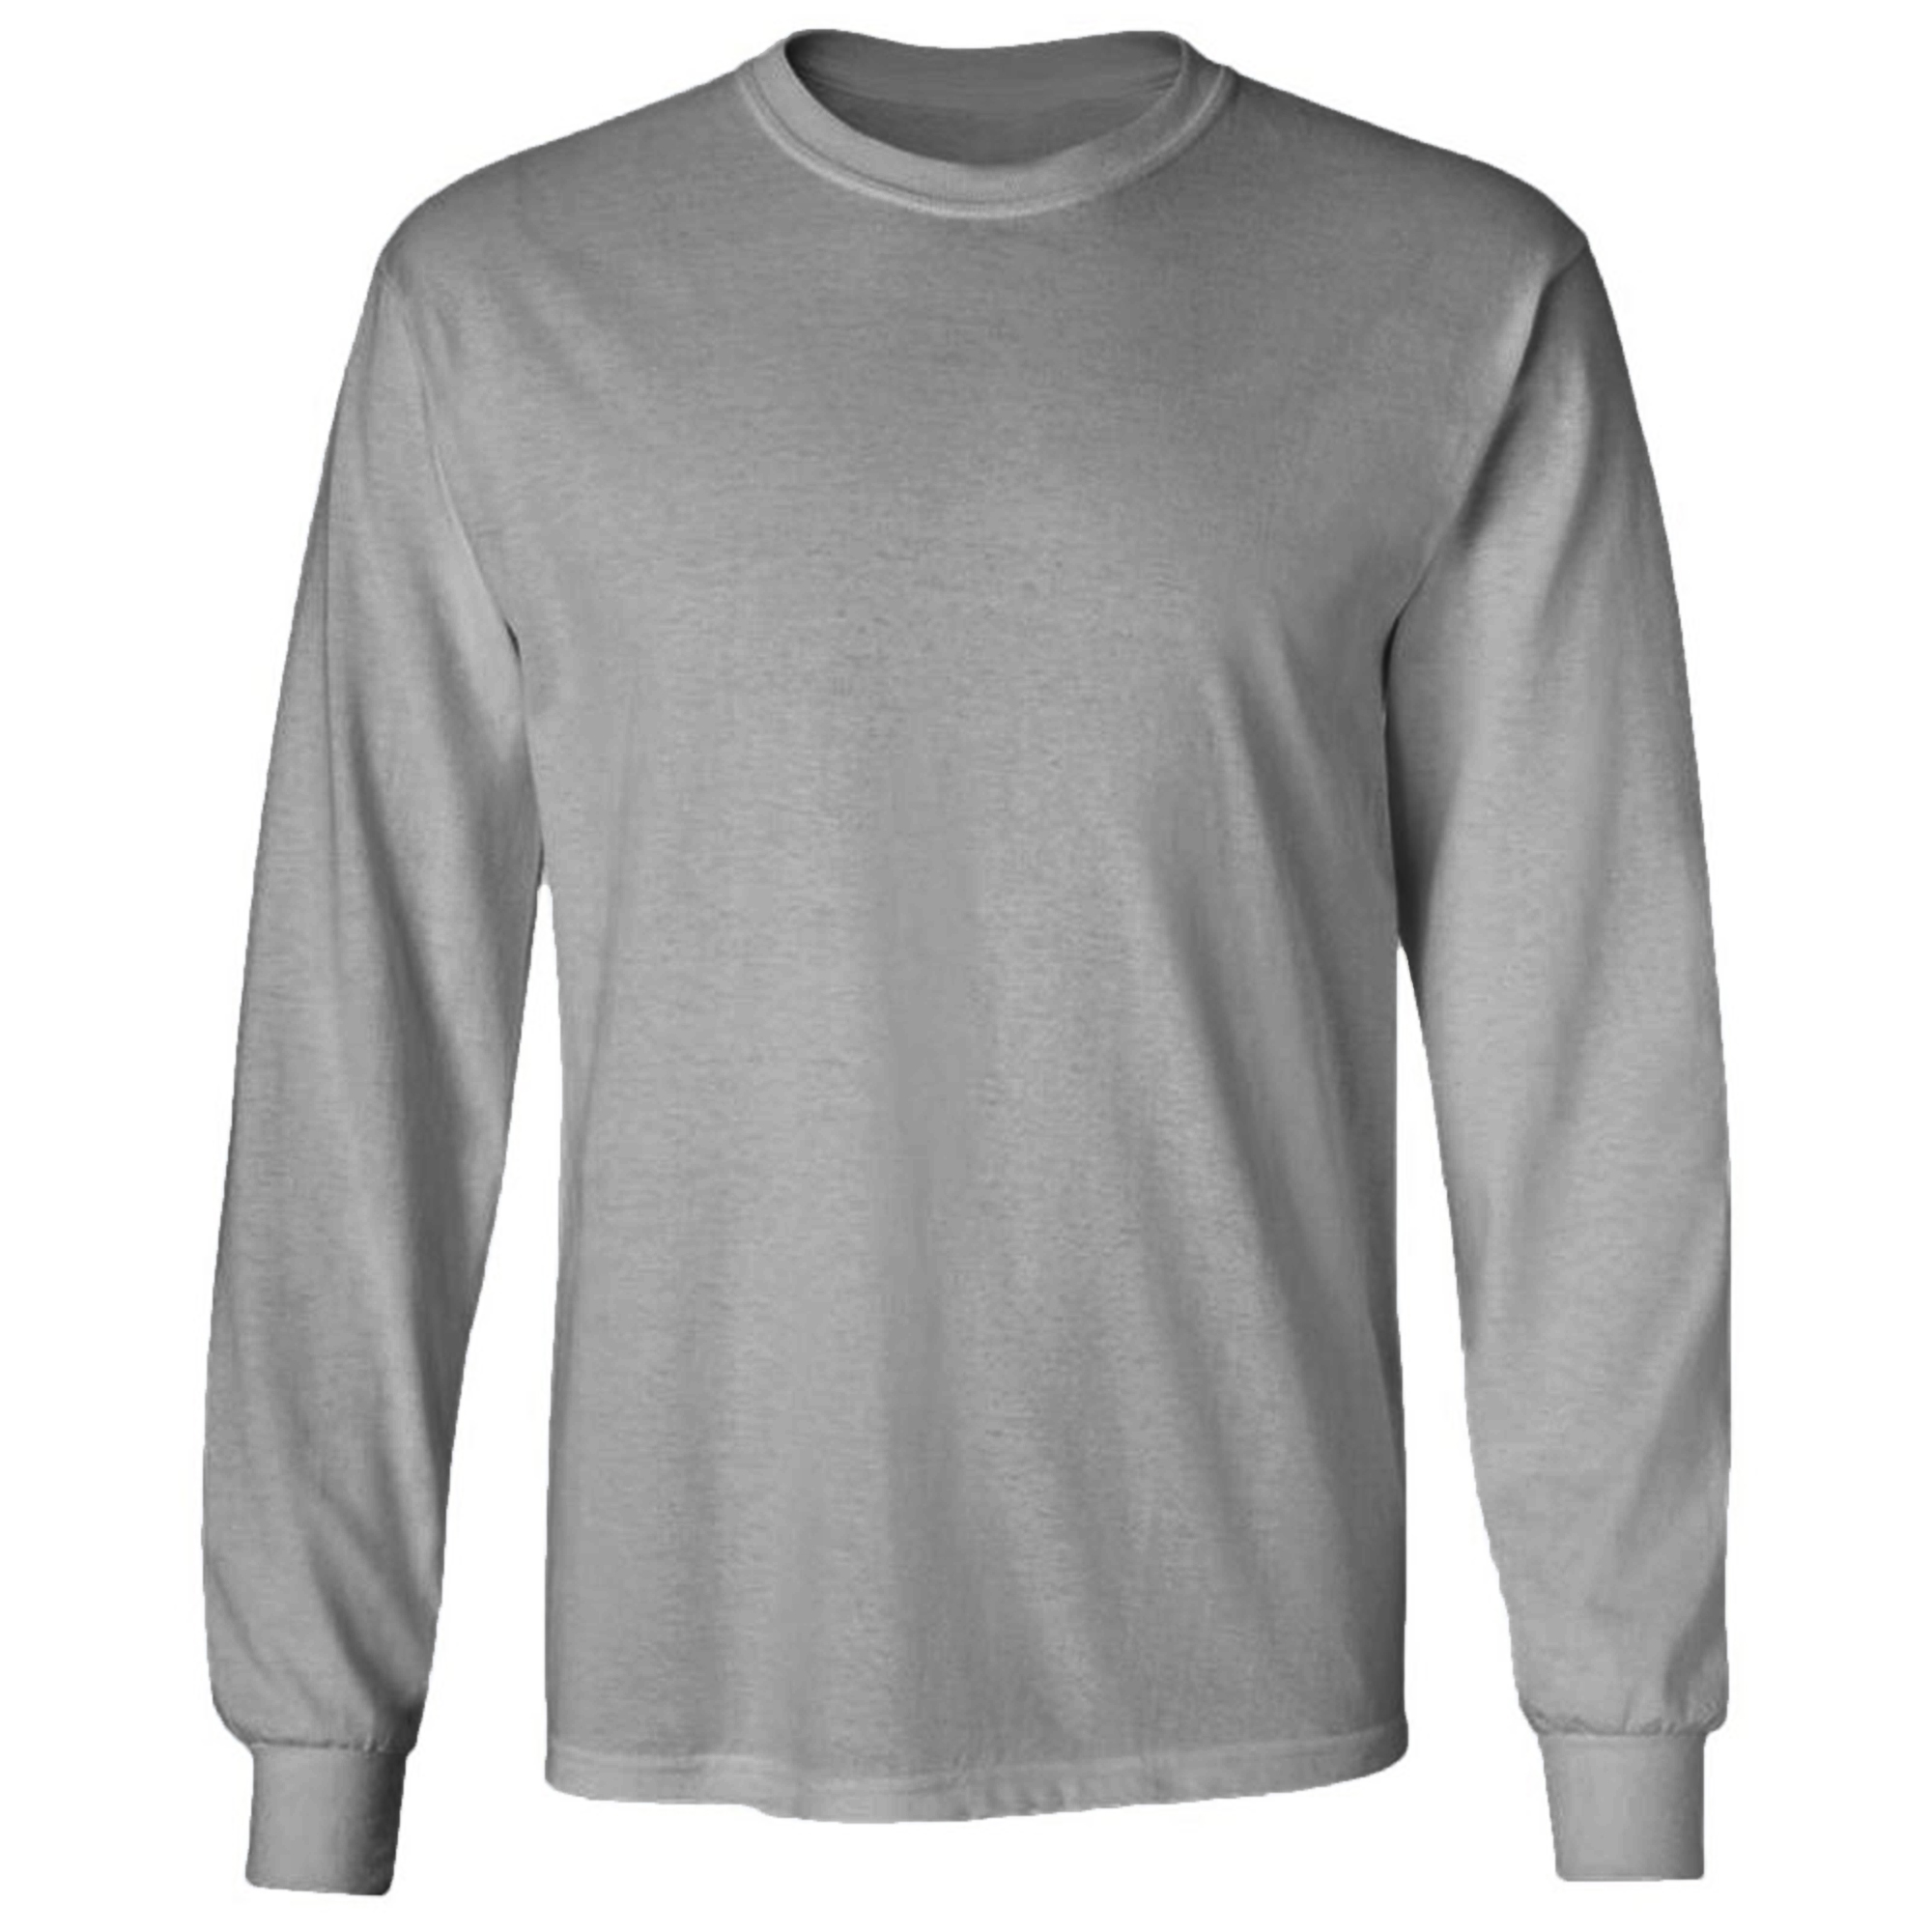 Best Long Sleeve T-Shirt Comfort and Fashion, 100% Polyester Blend